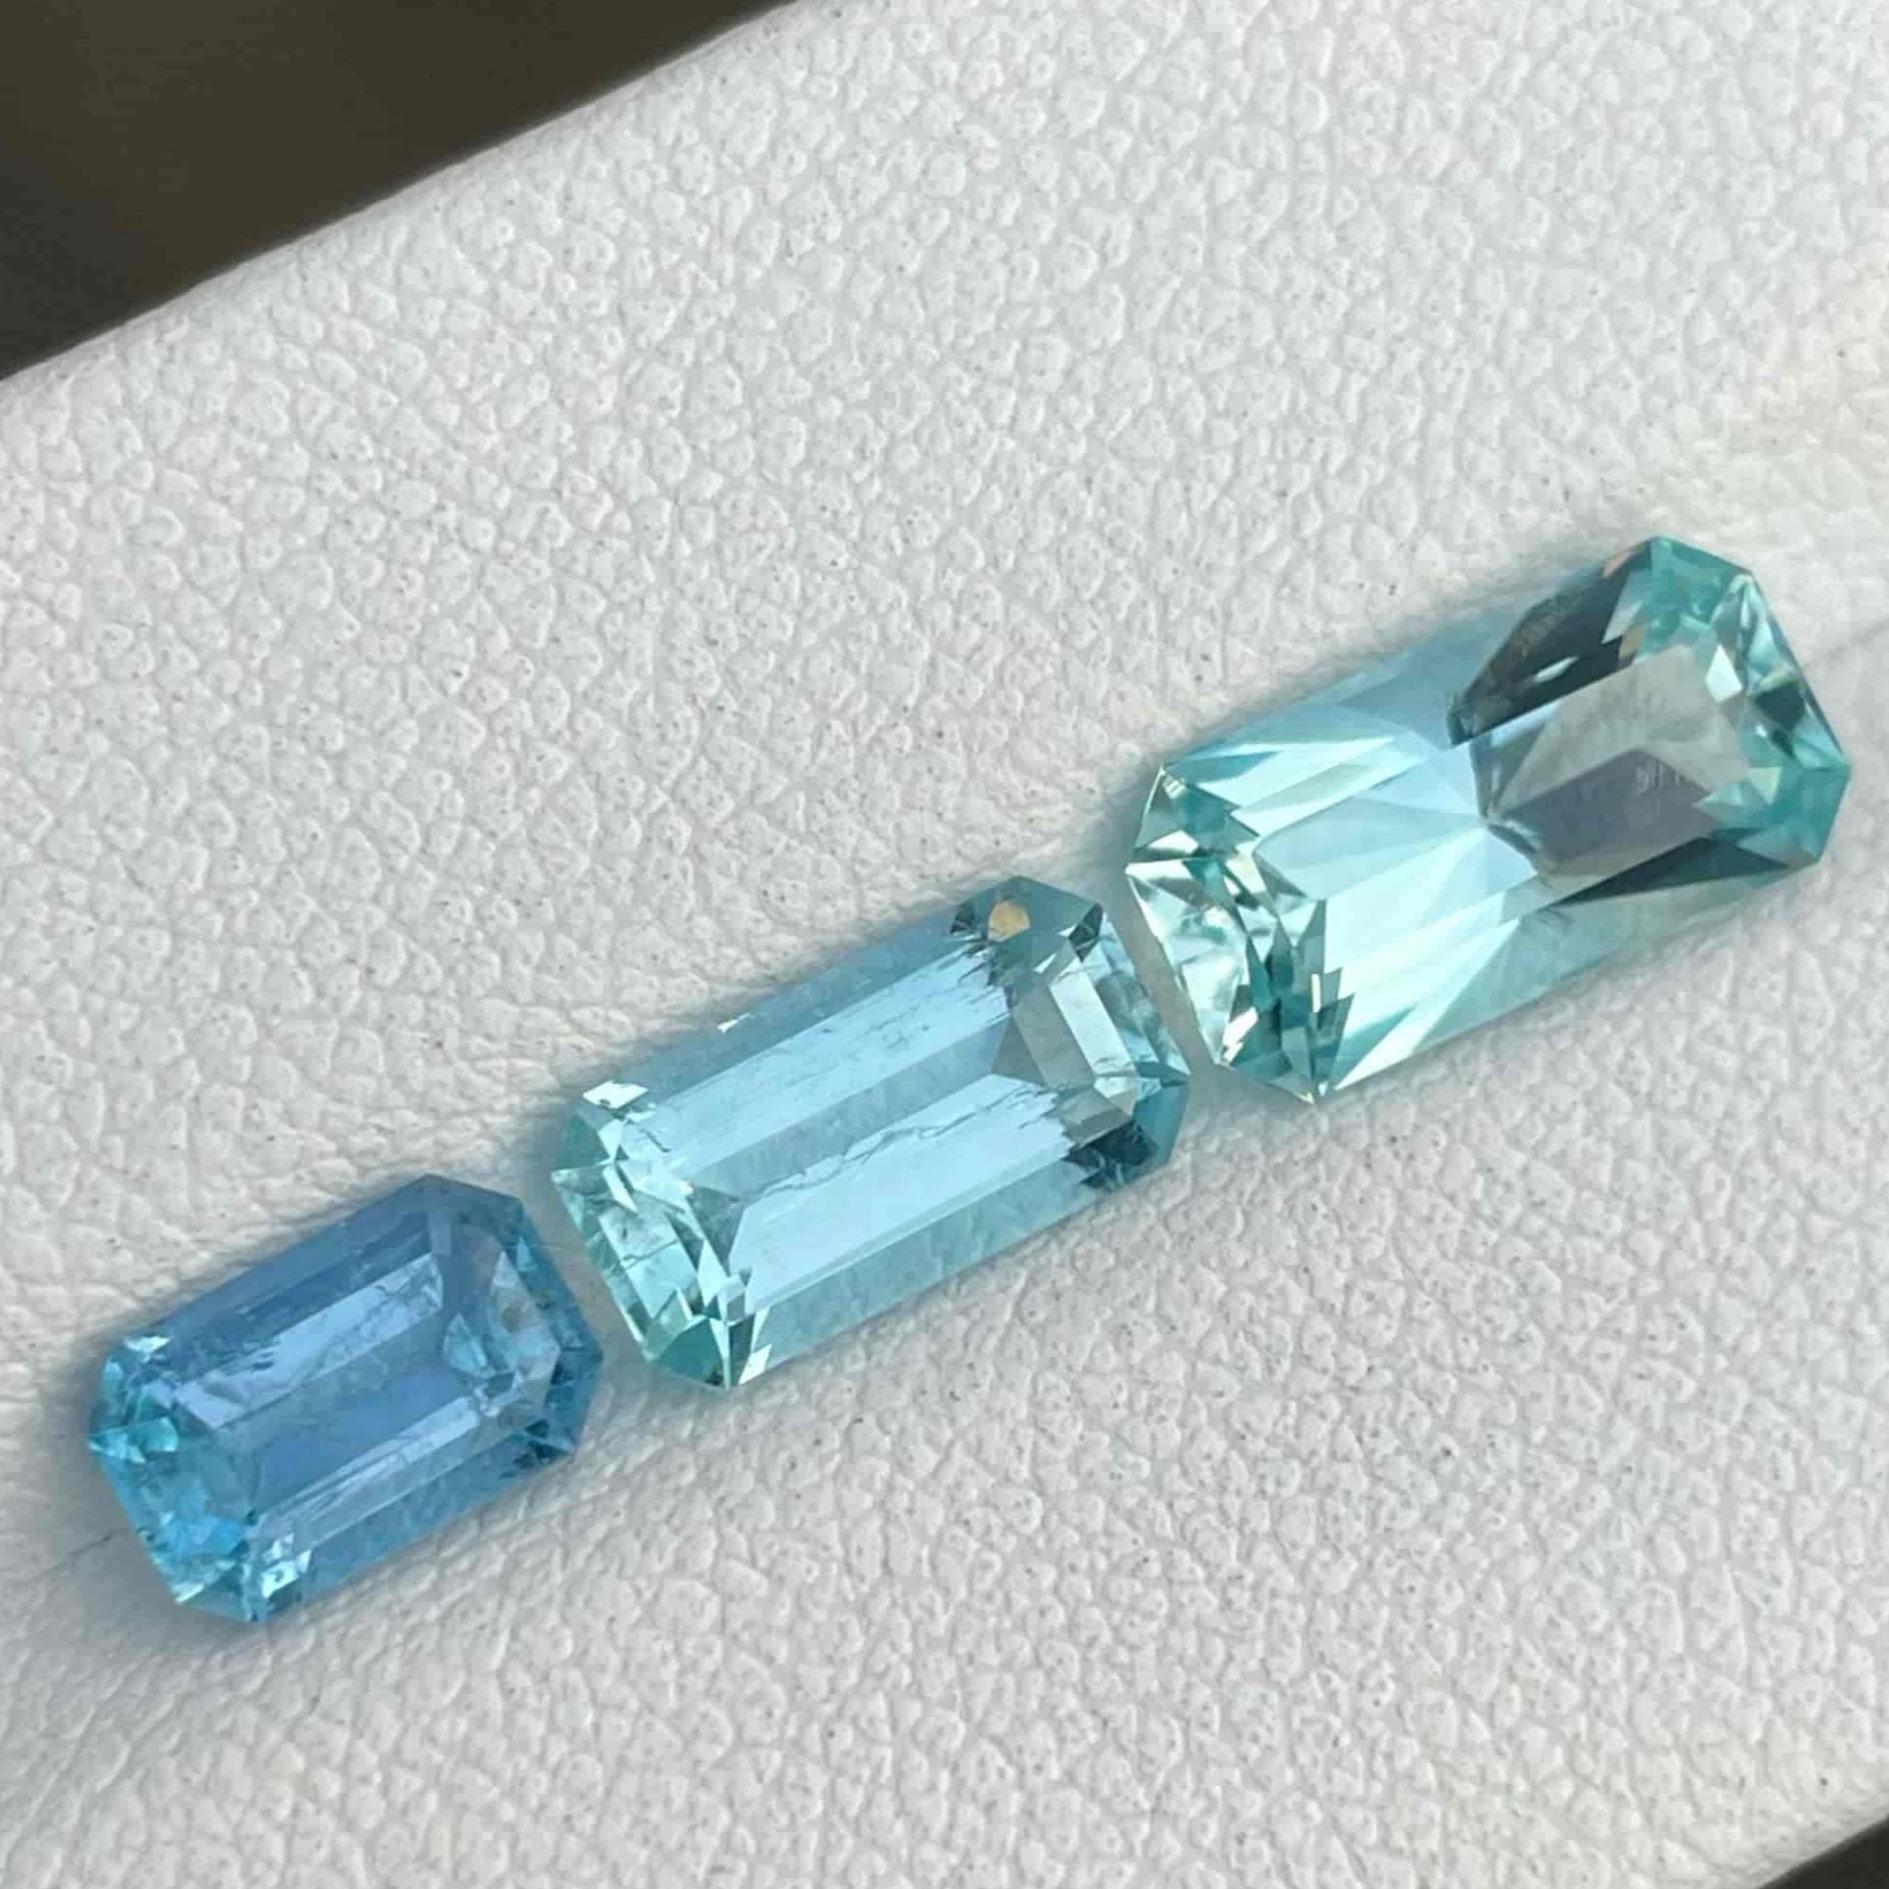 Gemstone Type Natural Dark Blue Aquamarine
Weight 4.40 carats
Individual Weight 1.95, 1.15, and 1.10 carats
Clarity Slightly Included (SI)
Origin Brazil
Treatment None





Introducing a captivating batch of Dark Blue Aquamarine stones, each